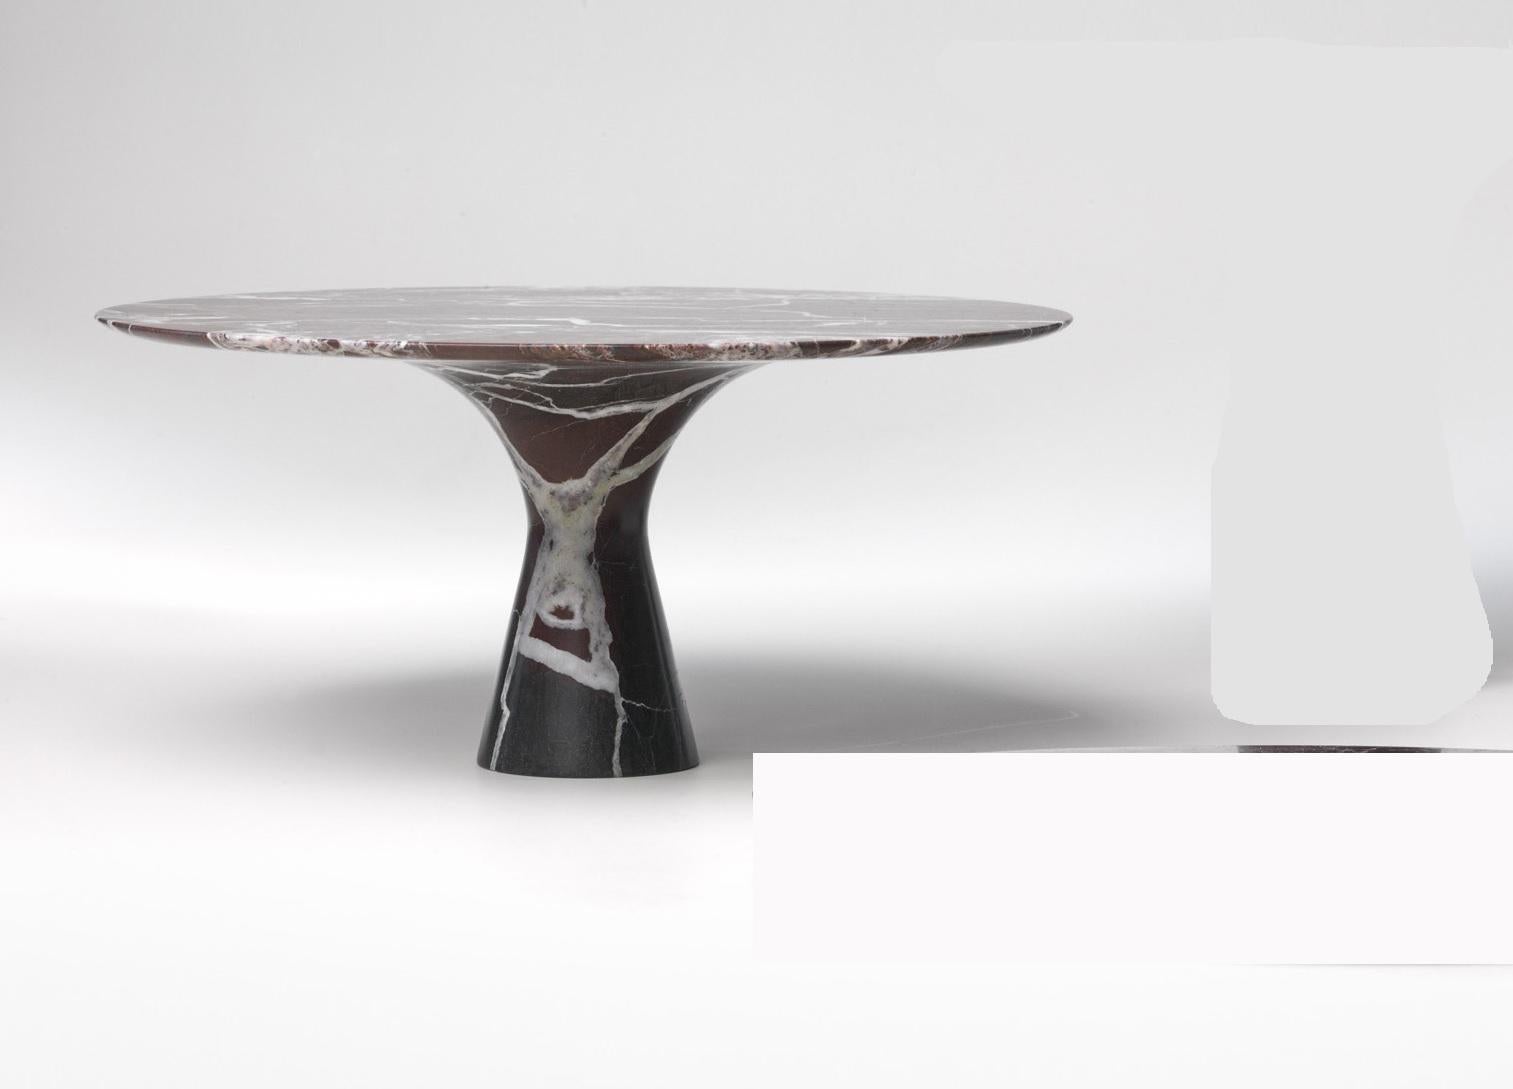 Refined Contemporary Marble 02 Rosso Levanto Marble Cake Stand
Signed by Leo Aerts.
Dimensions: Diameter 32 x H 15 cm 
Material: Rosso Levanto Marble
Technique: Polished, Carved. 
Available in Marble: Kyknos, Bianco Statuarietto, Grey Saint Laurent,